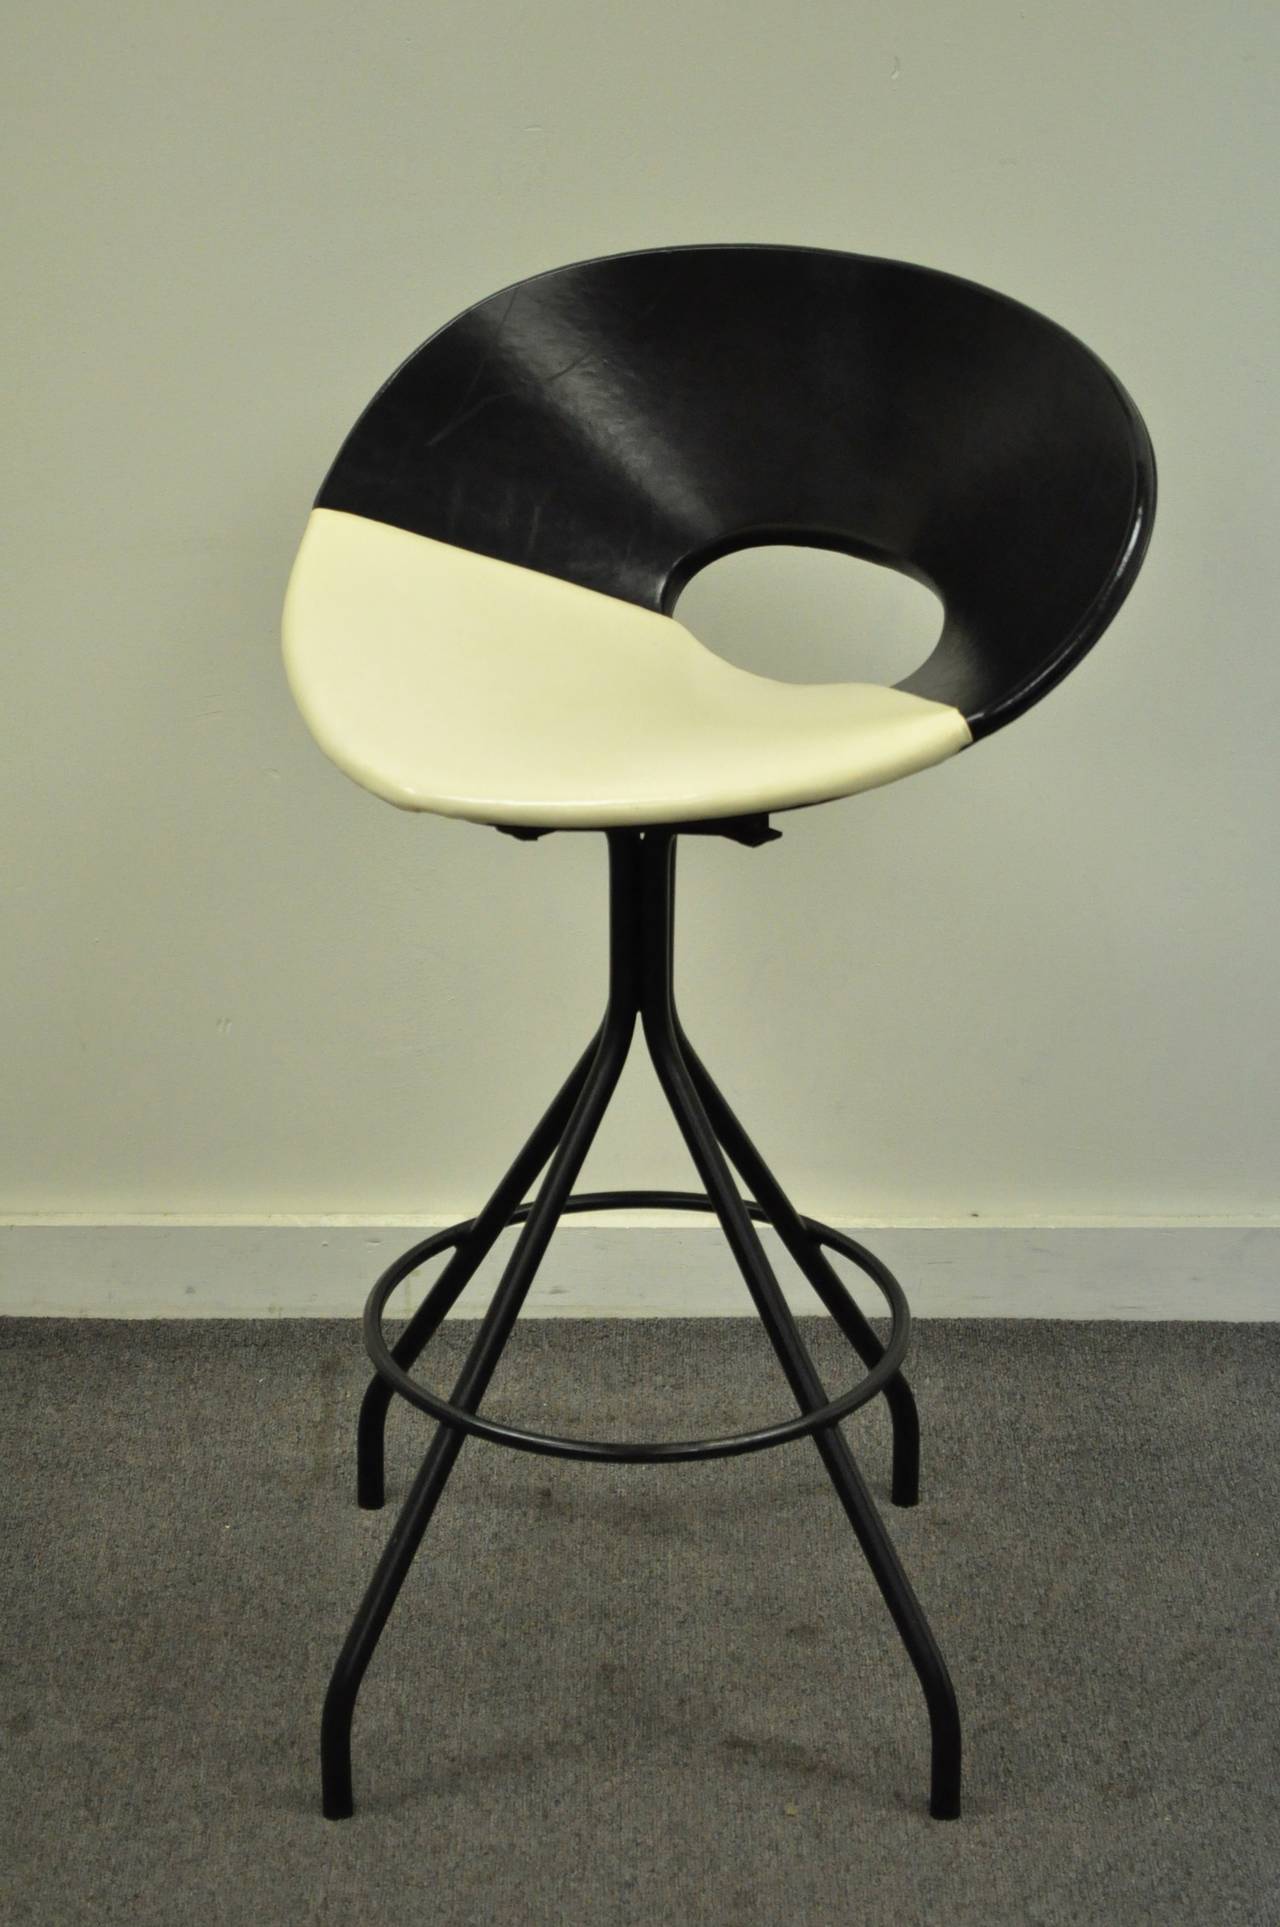 A striking original mid century modern iron & vinyl wrapped swivel bar stool. The chair features a decidedly Italian flair, with a wide black and cream colored vinyl seat, and dramatically splayed black wrought iron legs. Exemplary mid century